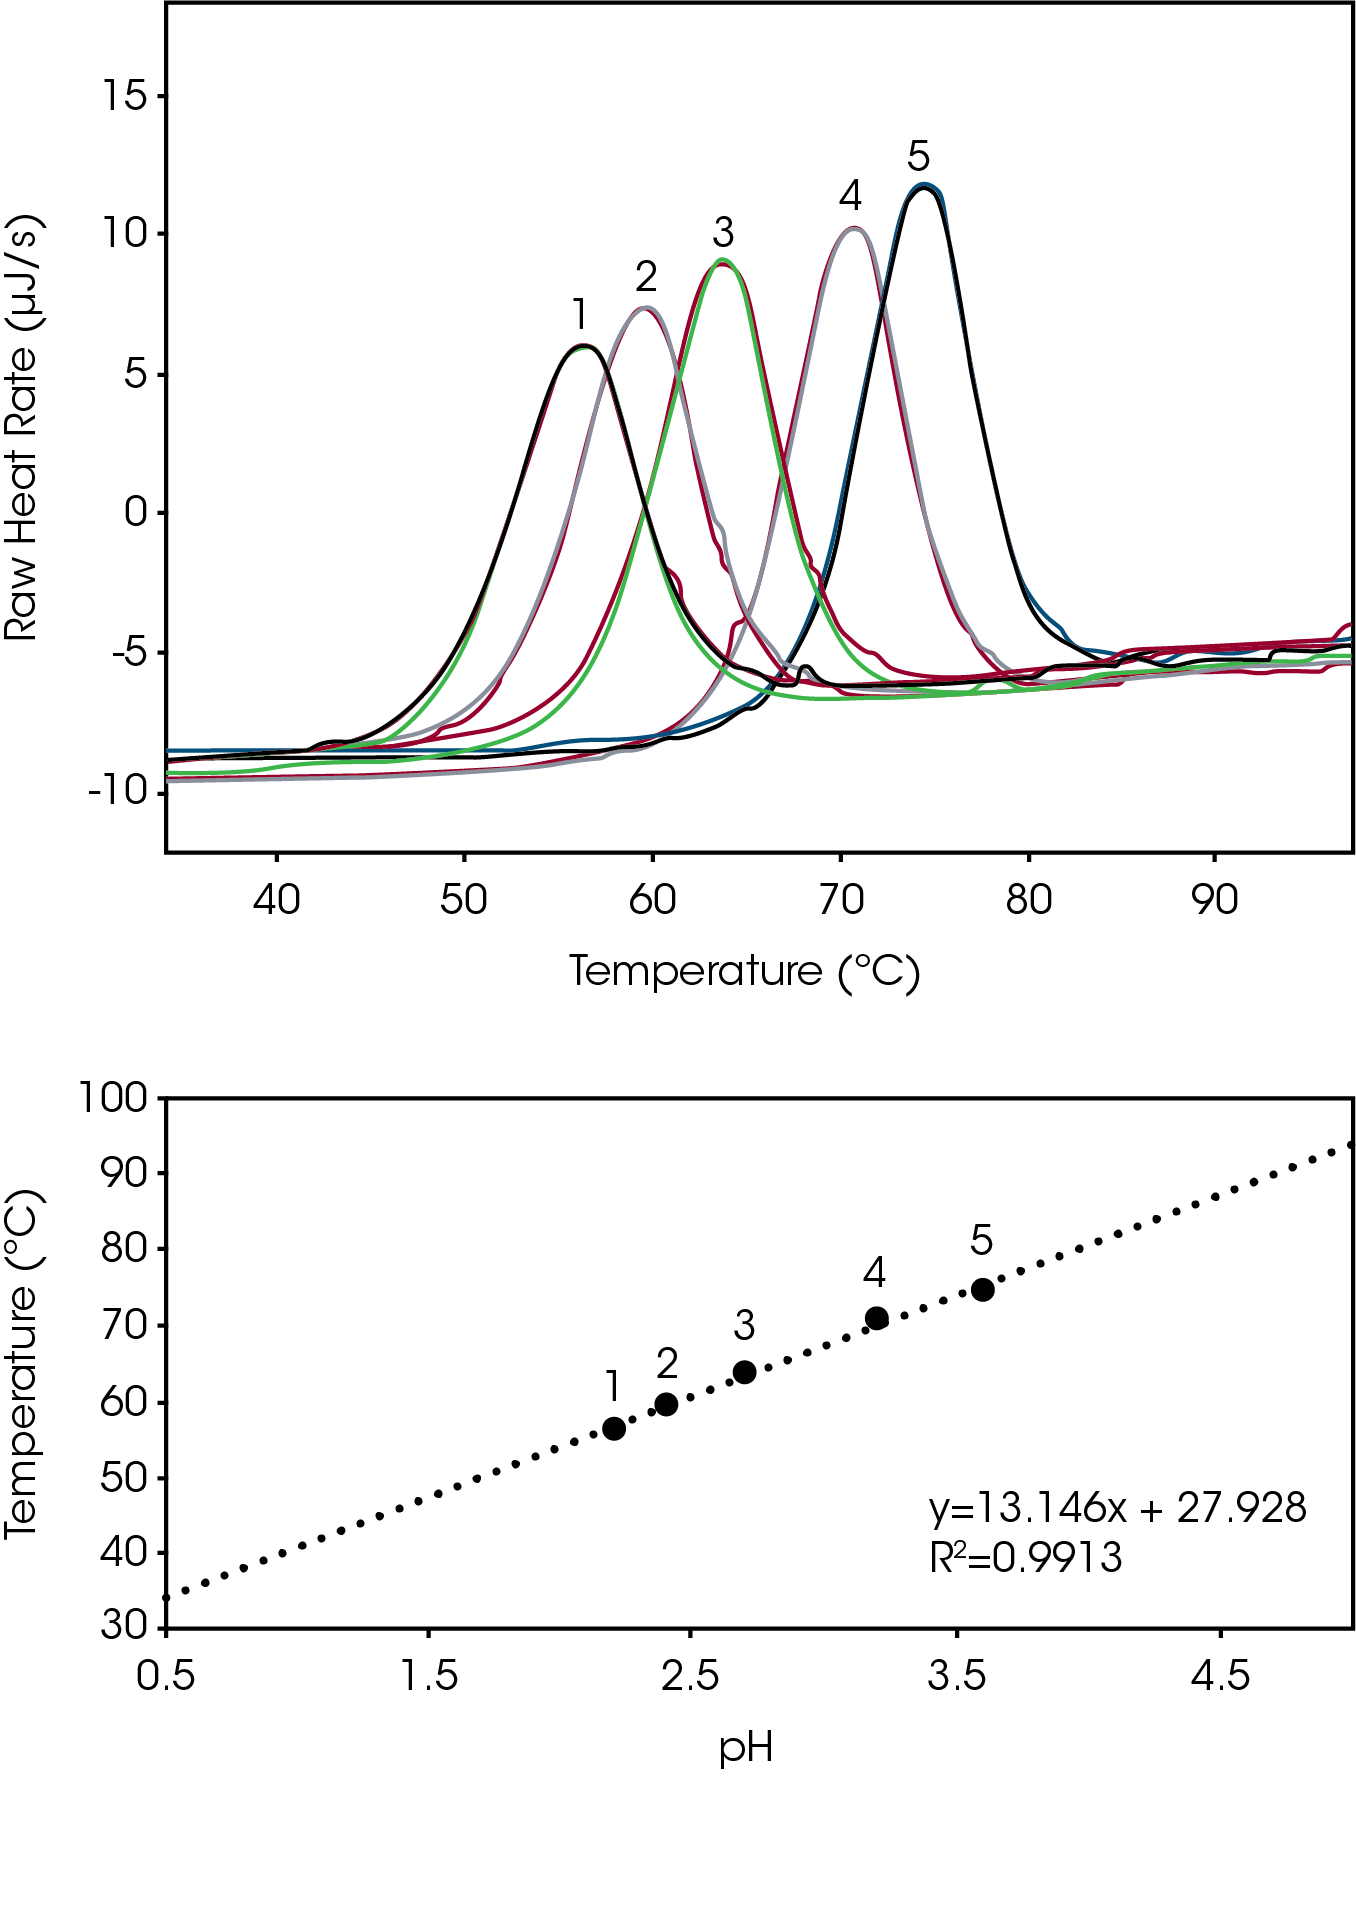 Figure 1. Top - Overlaid structure stability thermograms of lysozyme reference sample run in triplicate at 5 different pHs (NanoAnalyze Software). Middle - Peak structure stability temperature (Tmax) plotted versus pH.